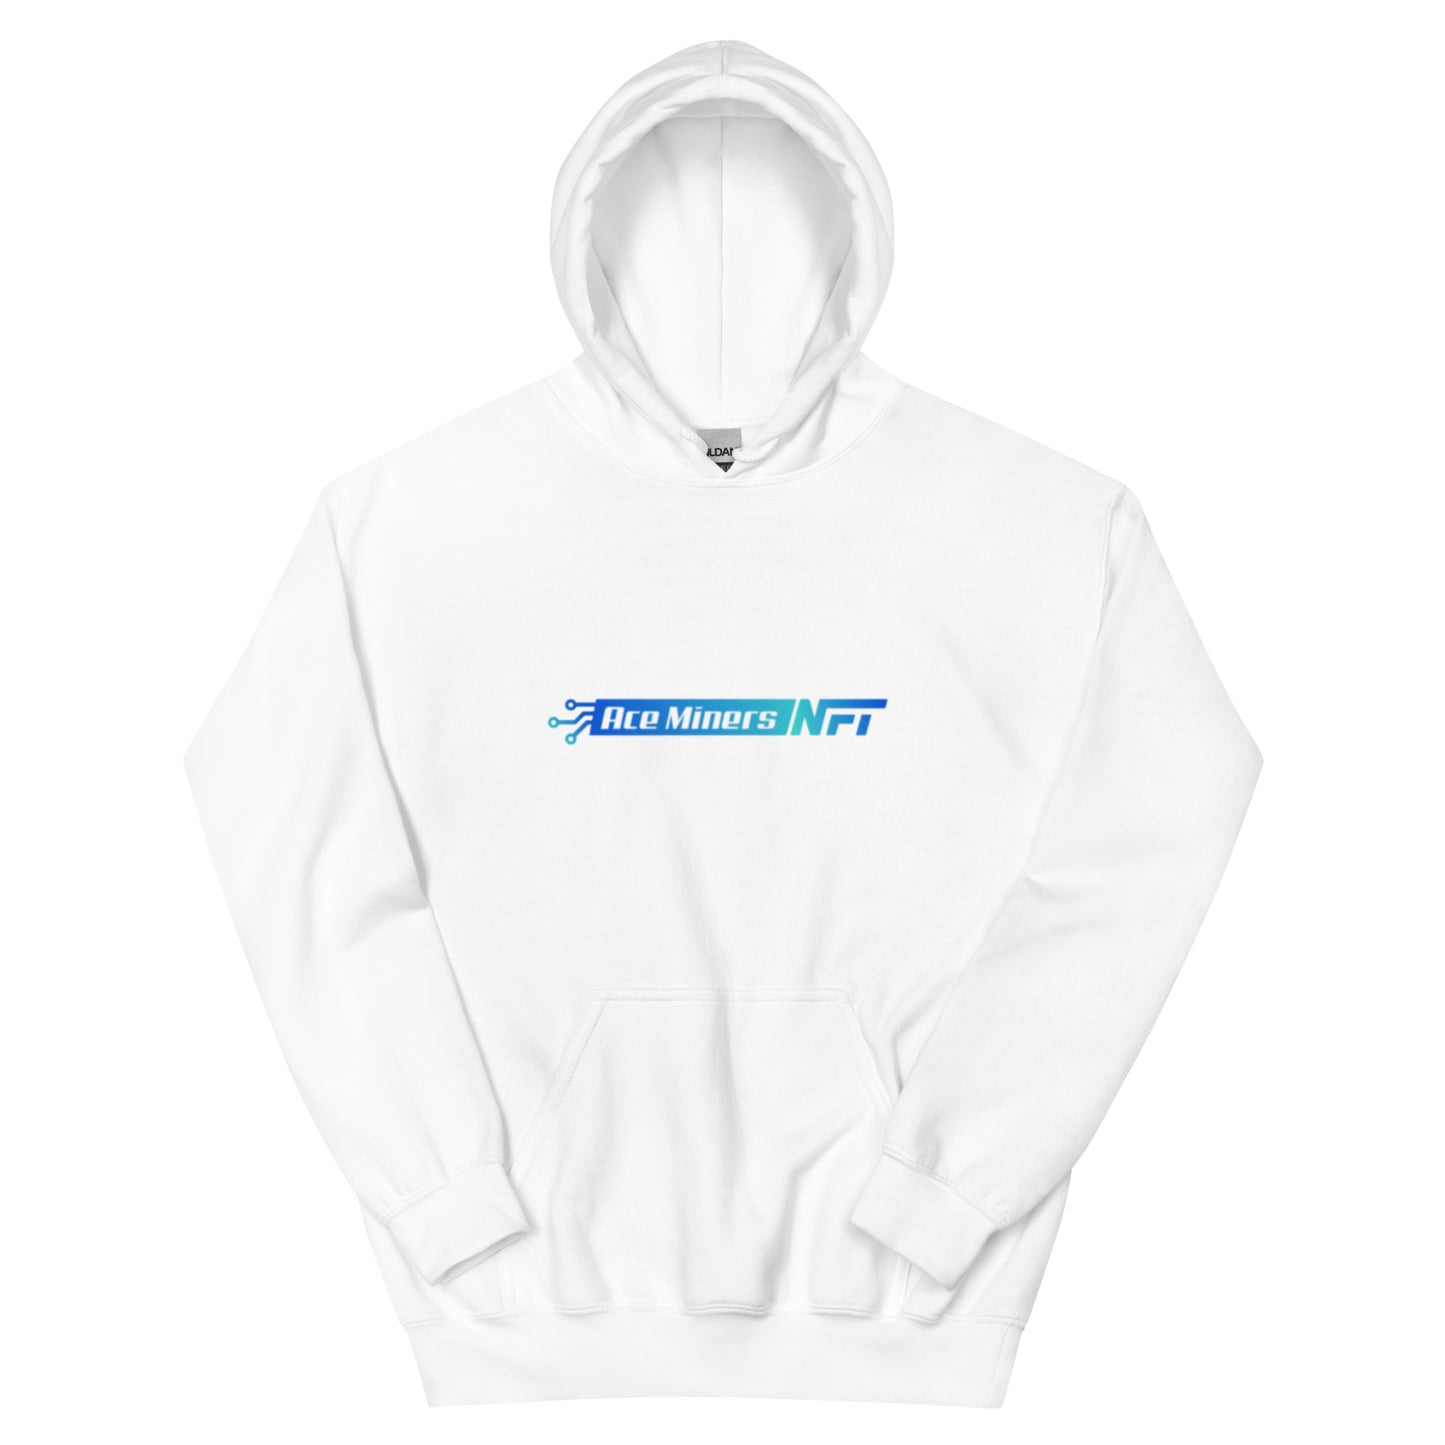 Ace Miners NFT Customizable Cotton Blend Hoodie with Personalized NFT Image Printing